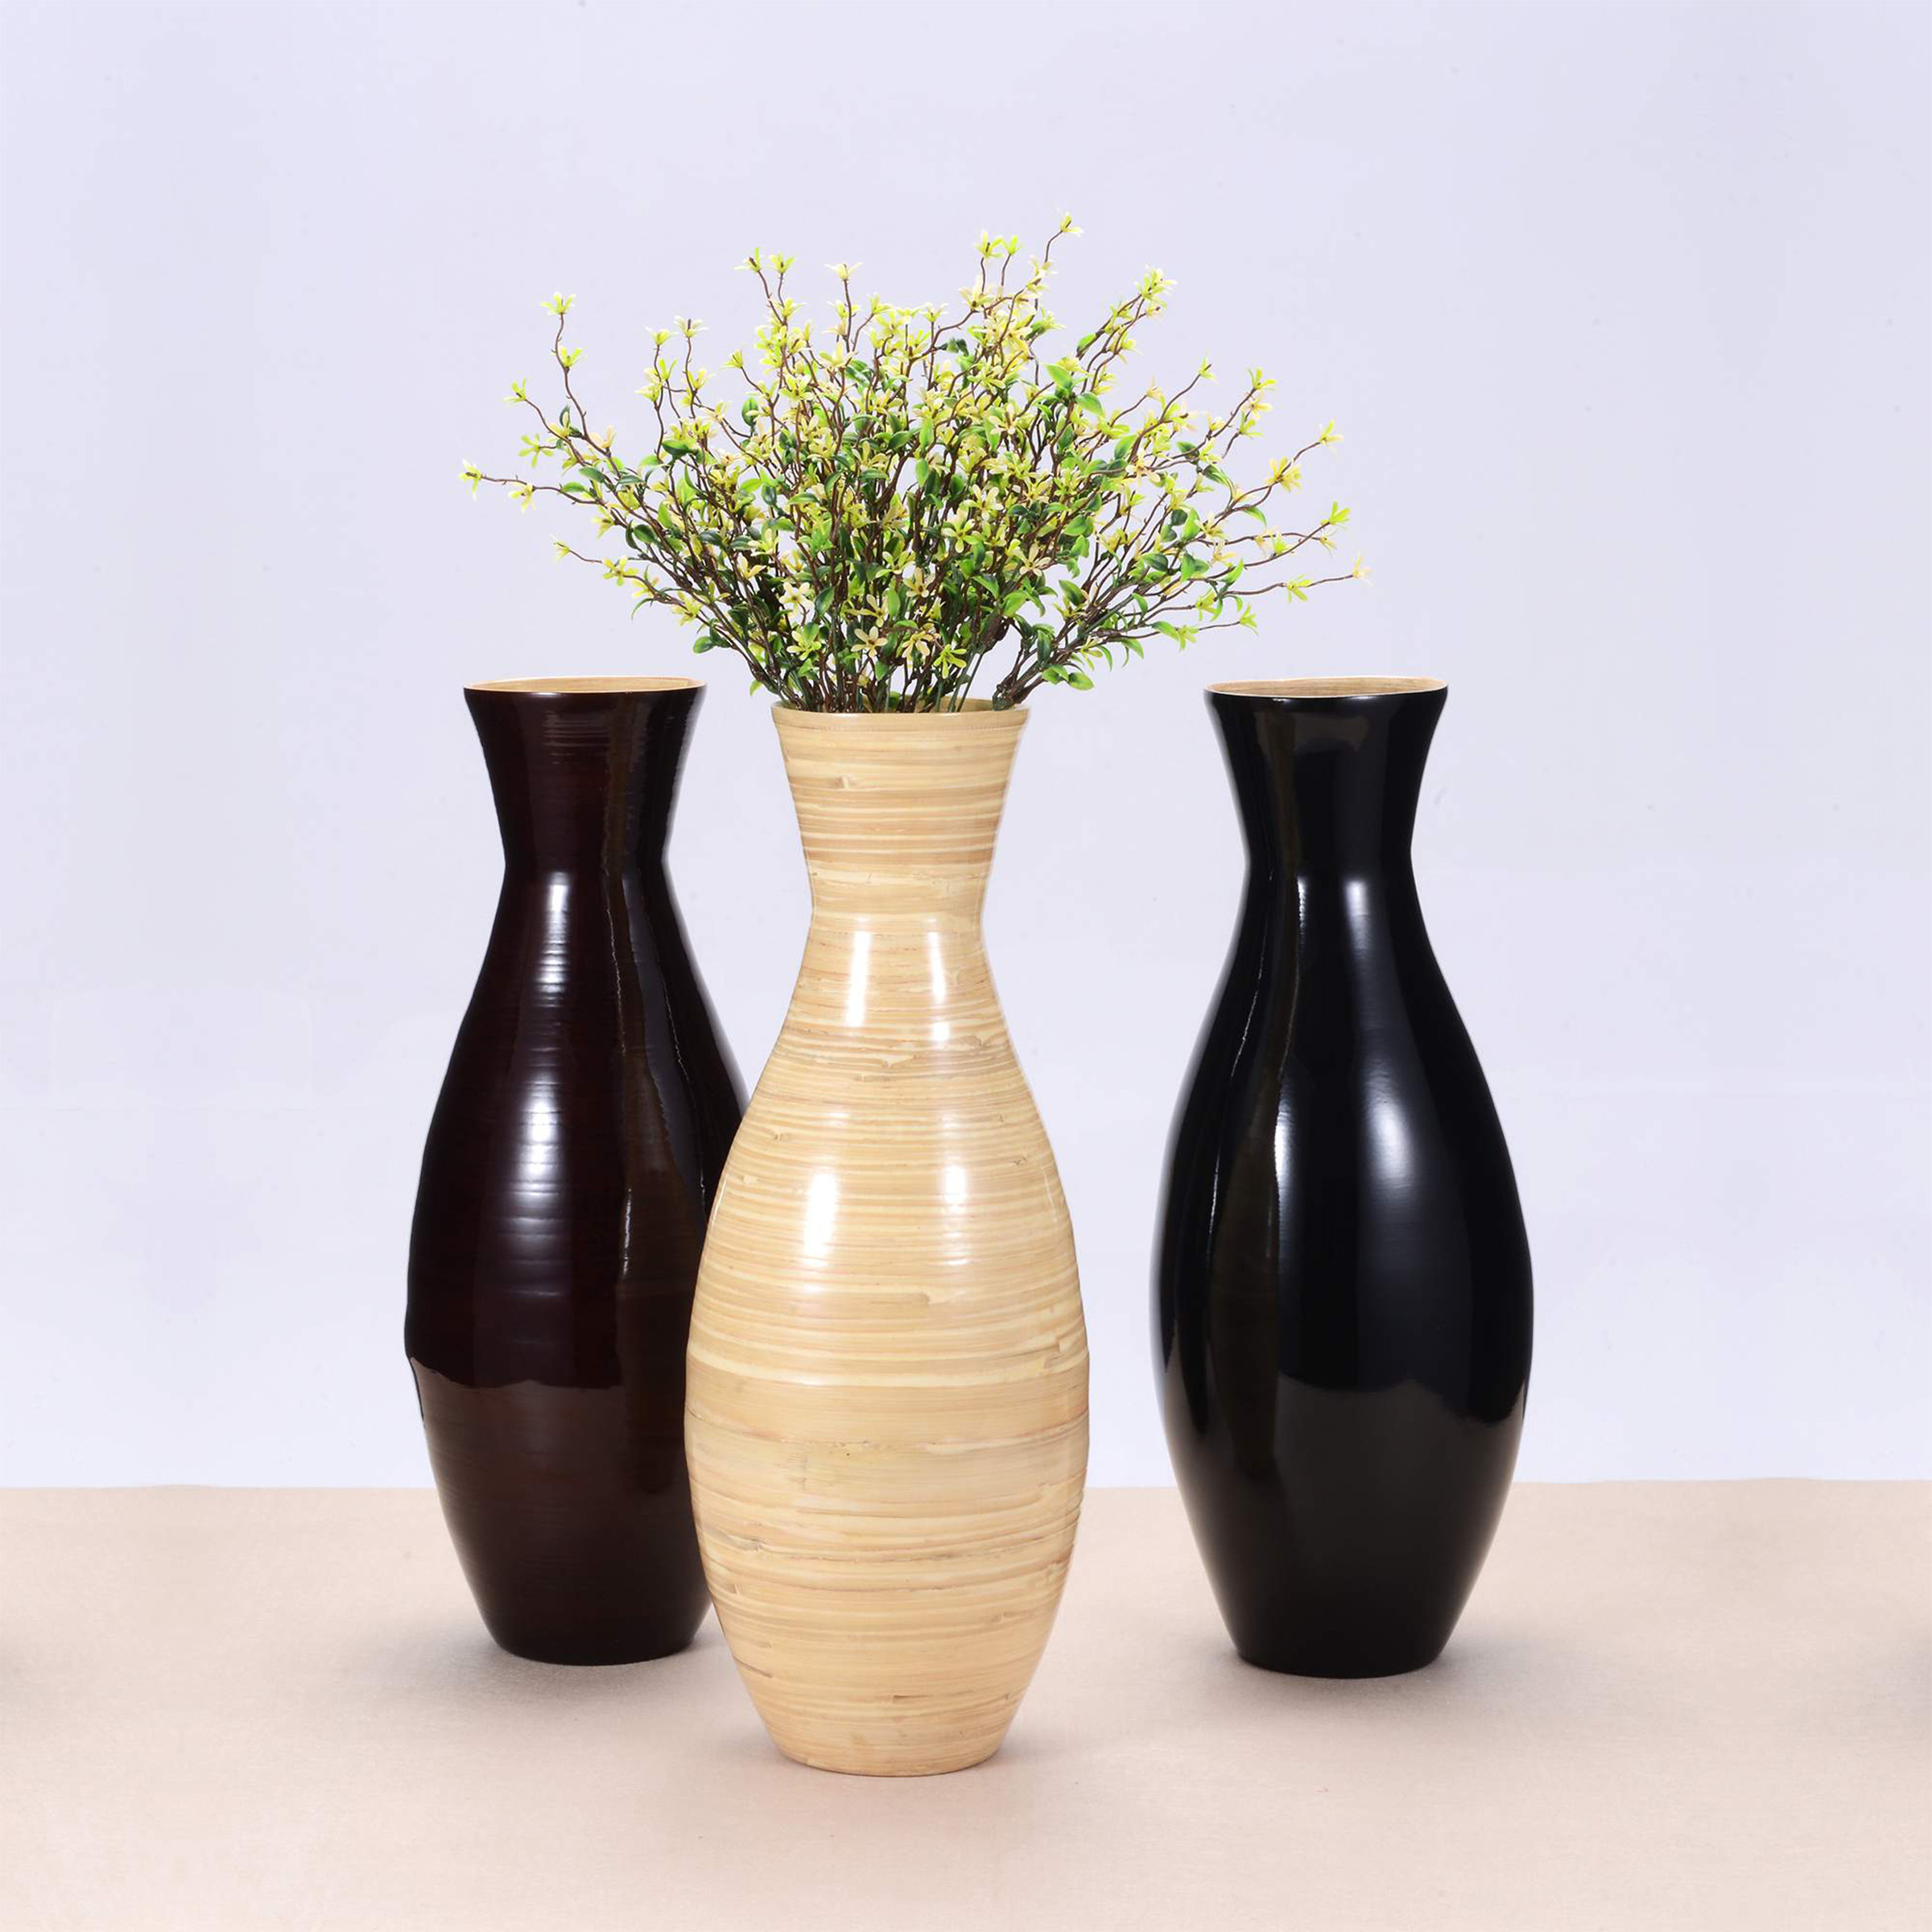 Villacera Handcrafted 20-Inch-Tall Sustainable Bamboo Floor Vase (Natural) - image 4 of 6